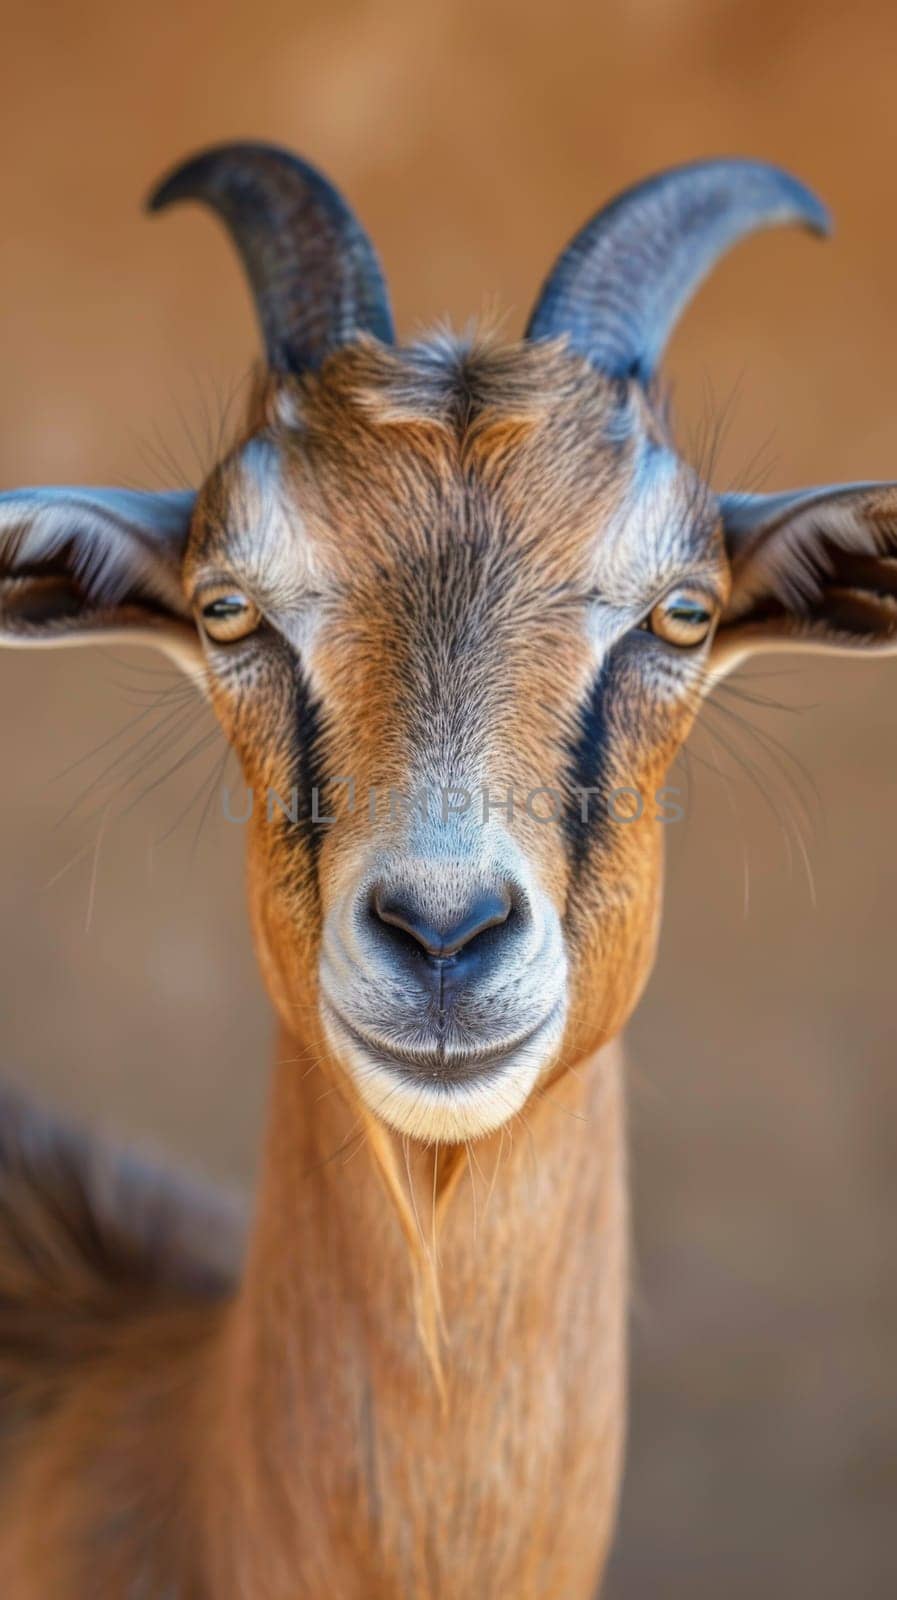 A goat with long horns and a brown face looking at the camera